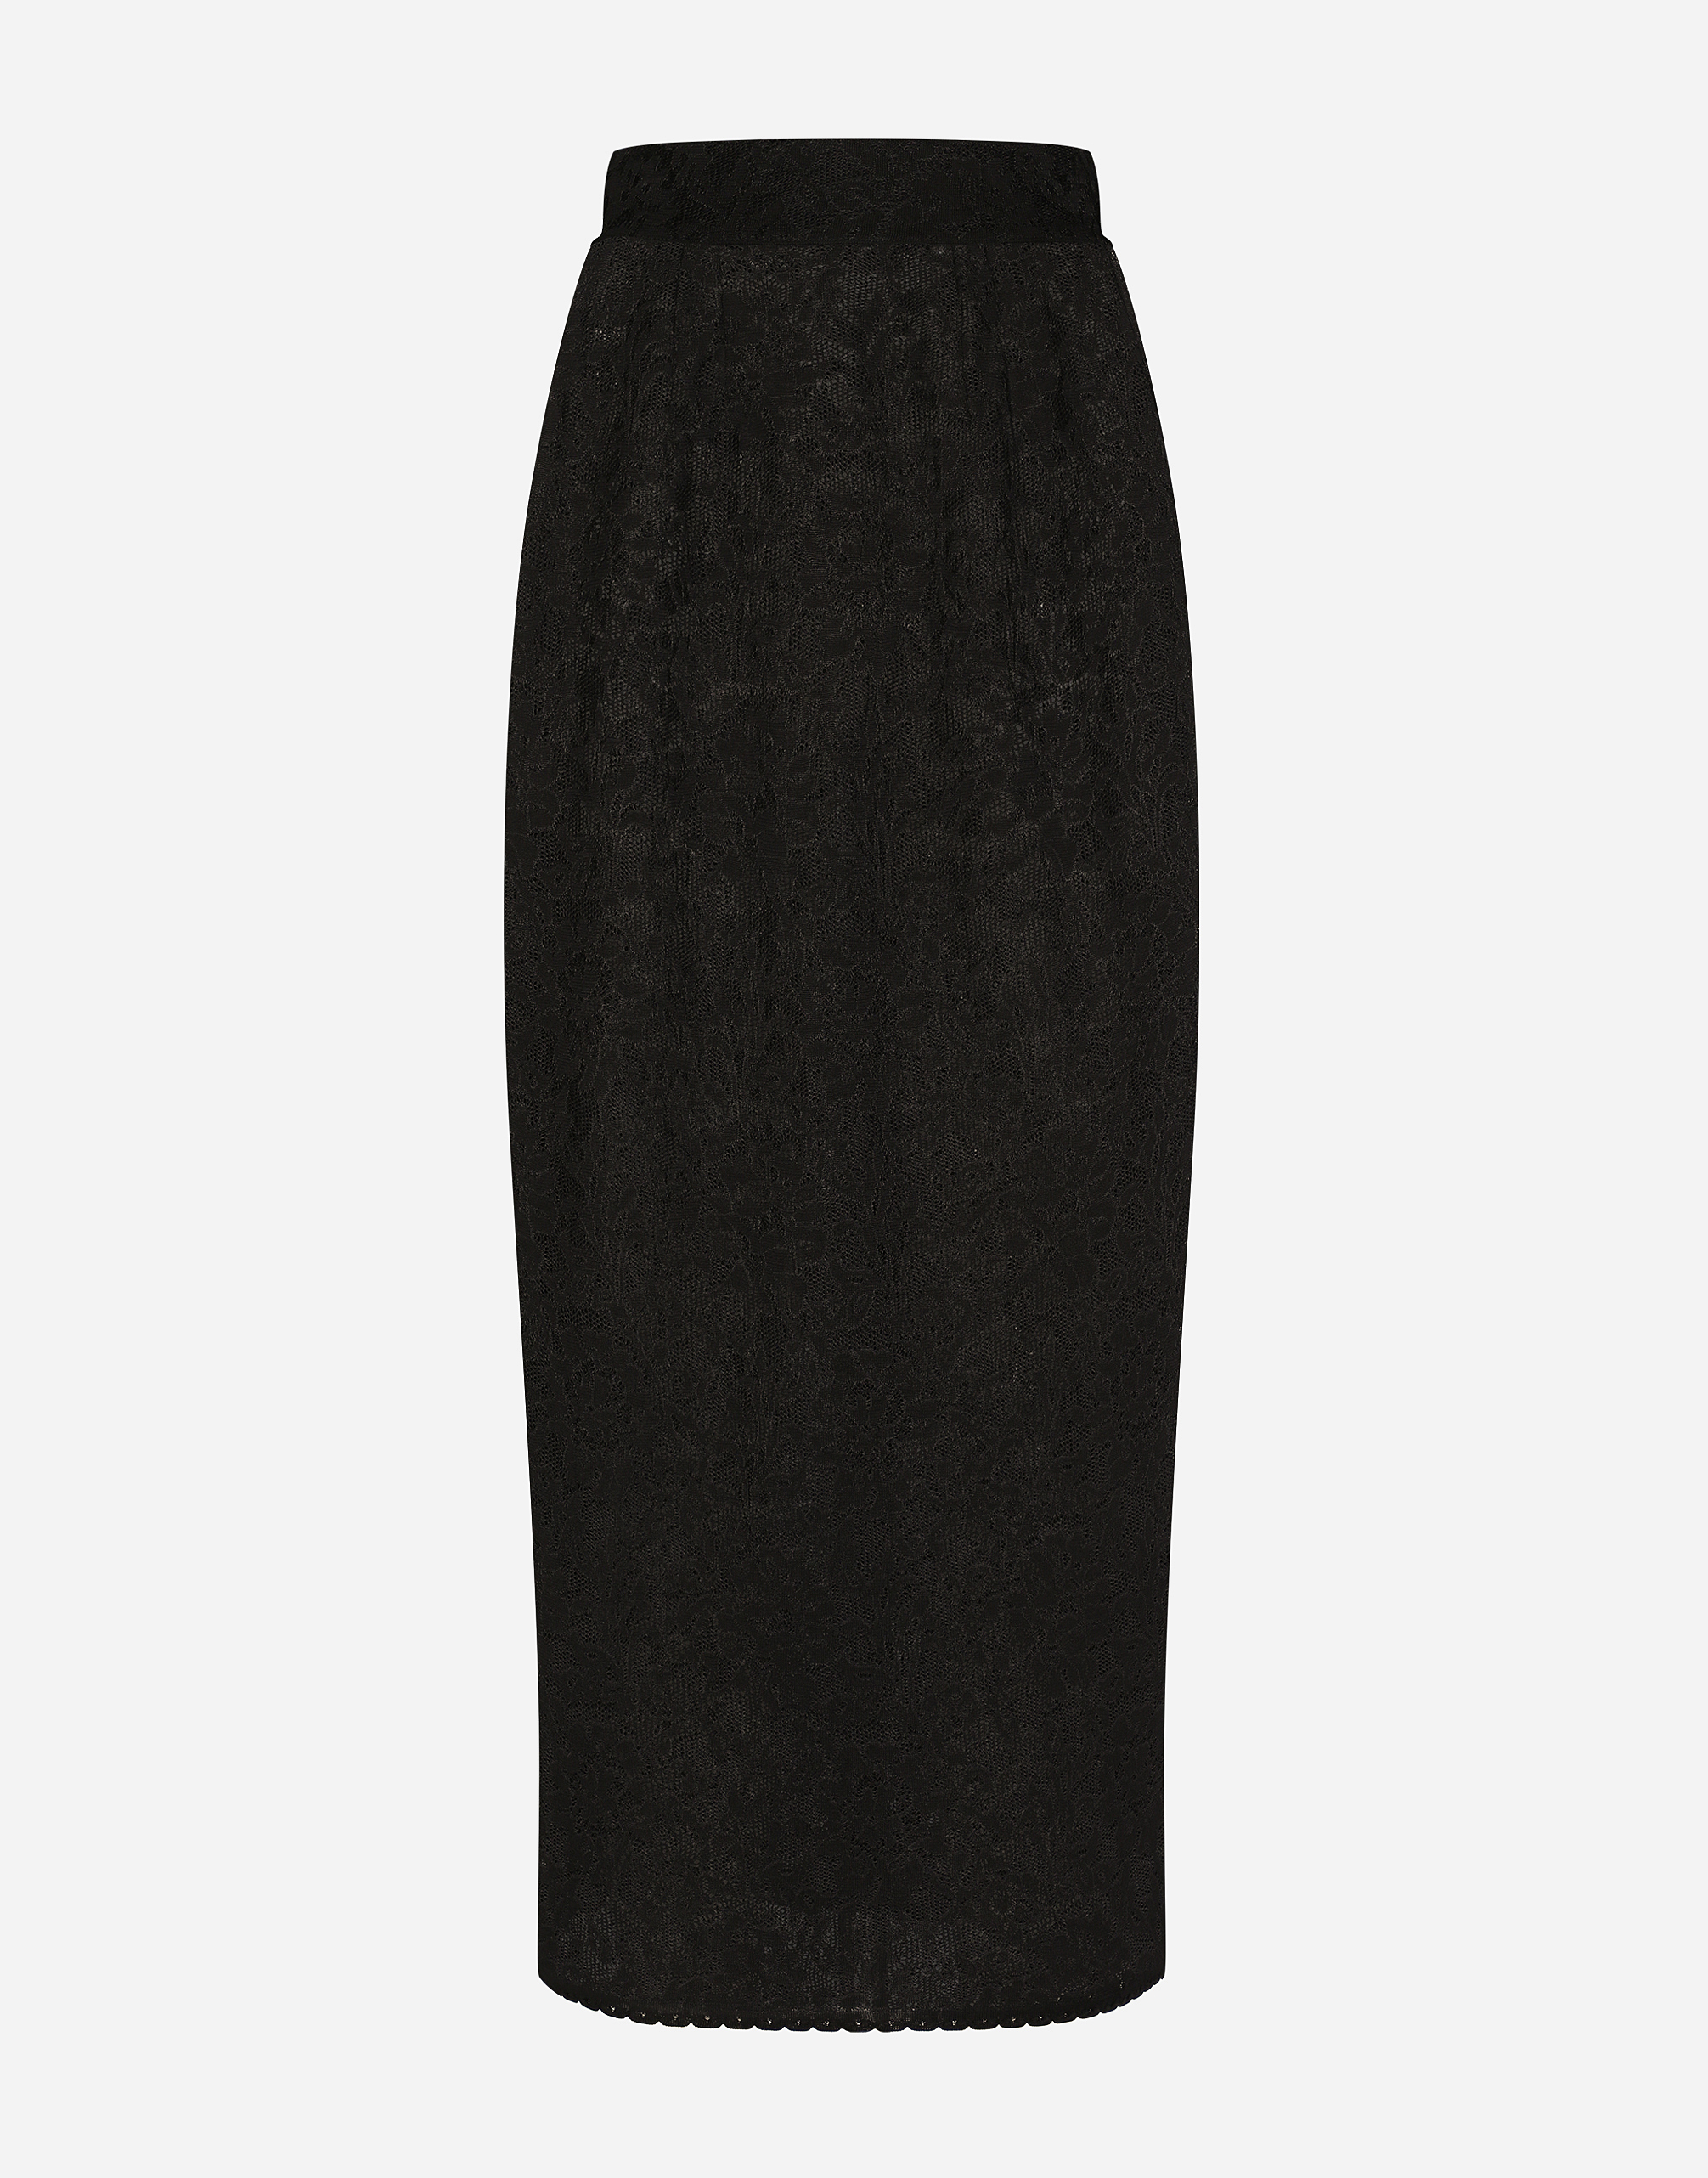 Lace-stitch calf-length skirt in Black